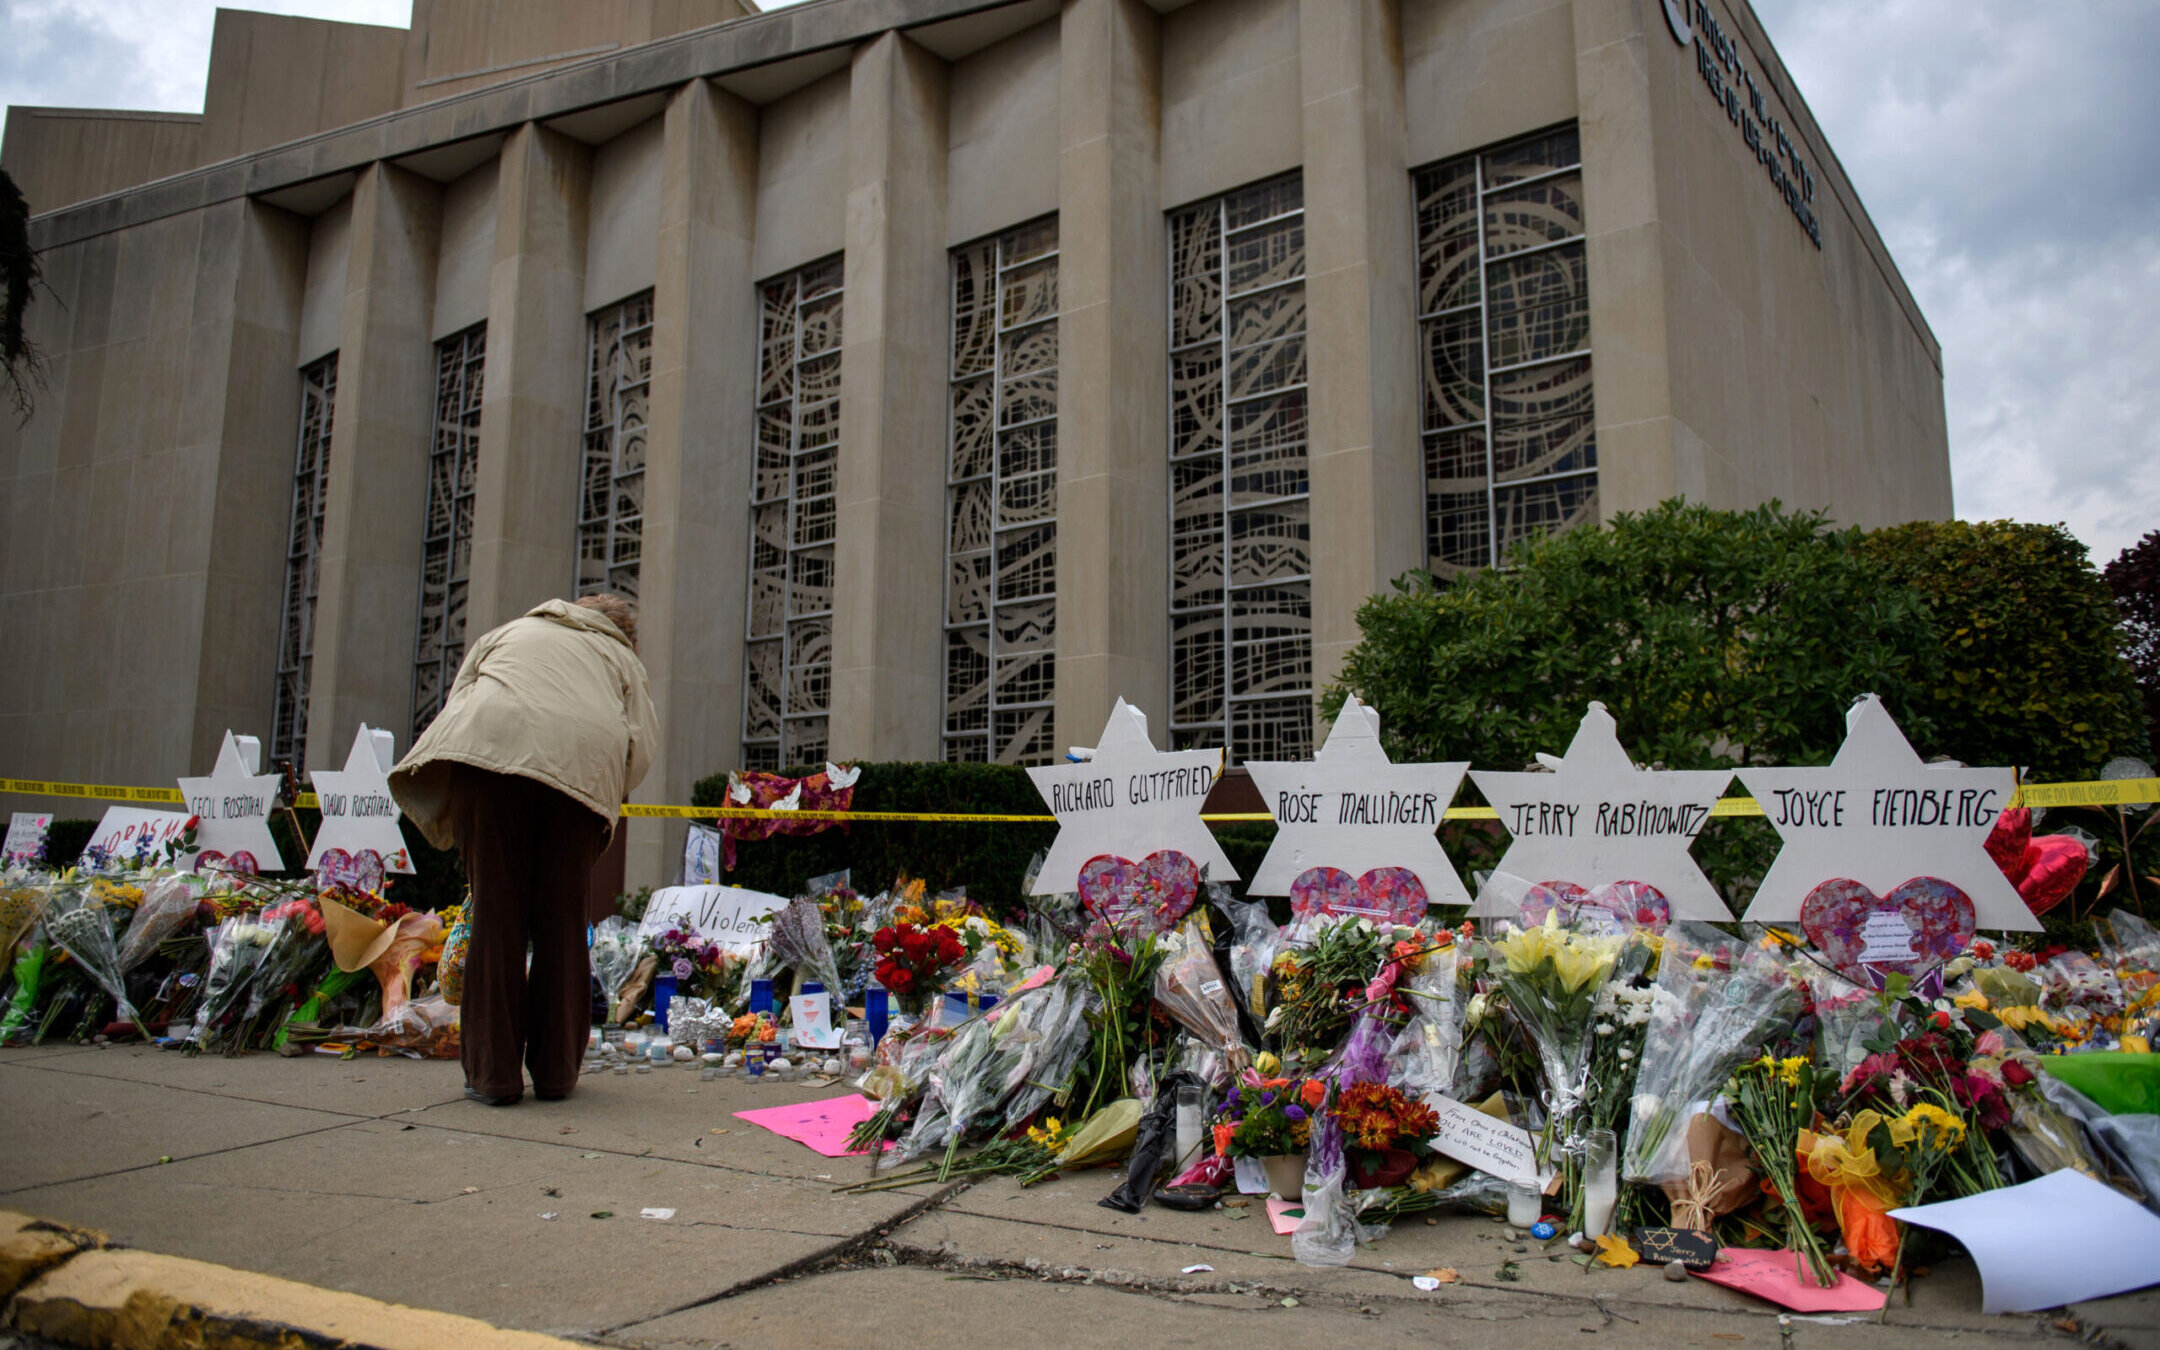 Mourners visit the memorial outside the Tree of Life Synagogue, Oct. 31, 2018 in Pittsburgh, Pennsylvania, four days after 11 Jewish worshippers were killed during services there. The alleged shooter’s trial begins April 24, 2023. (Jeff Swensen/Getty Images)